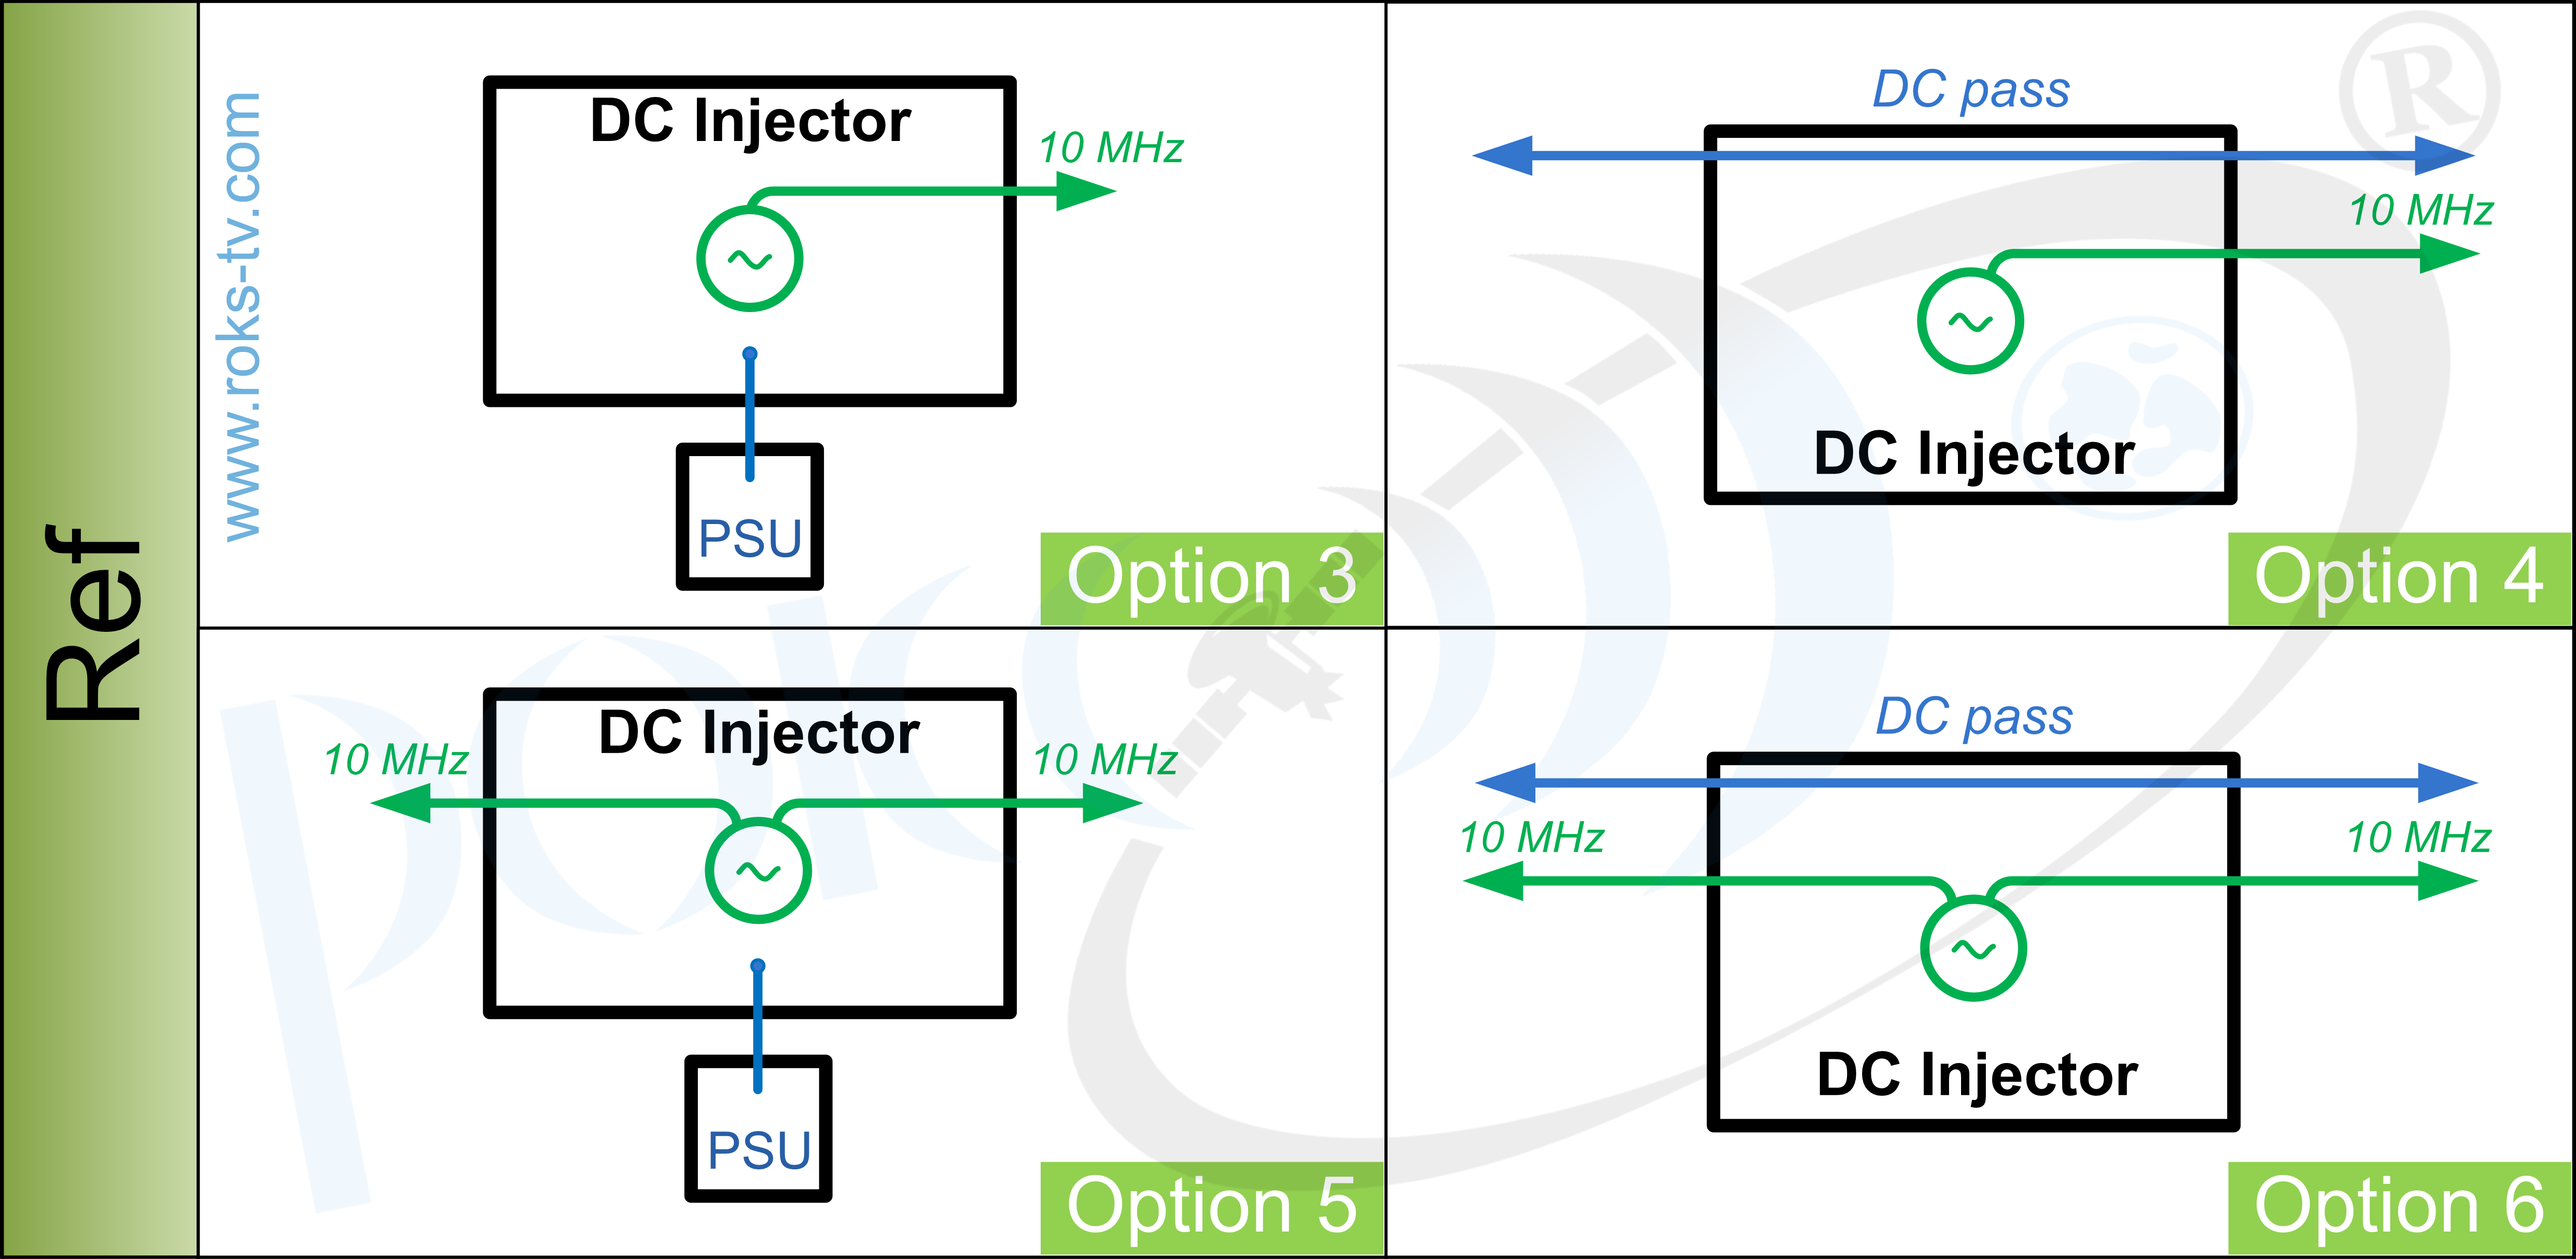 DC injector with Reference